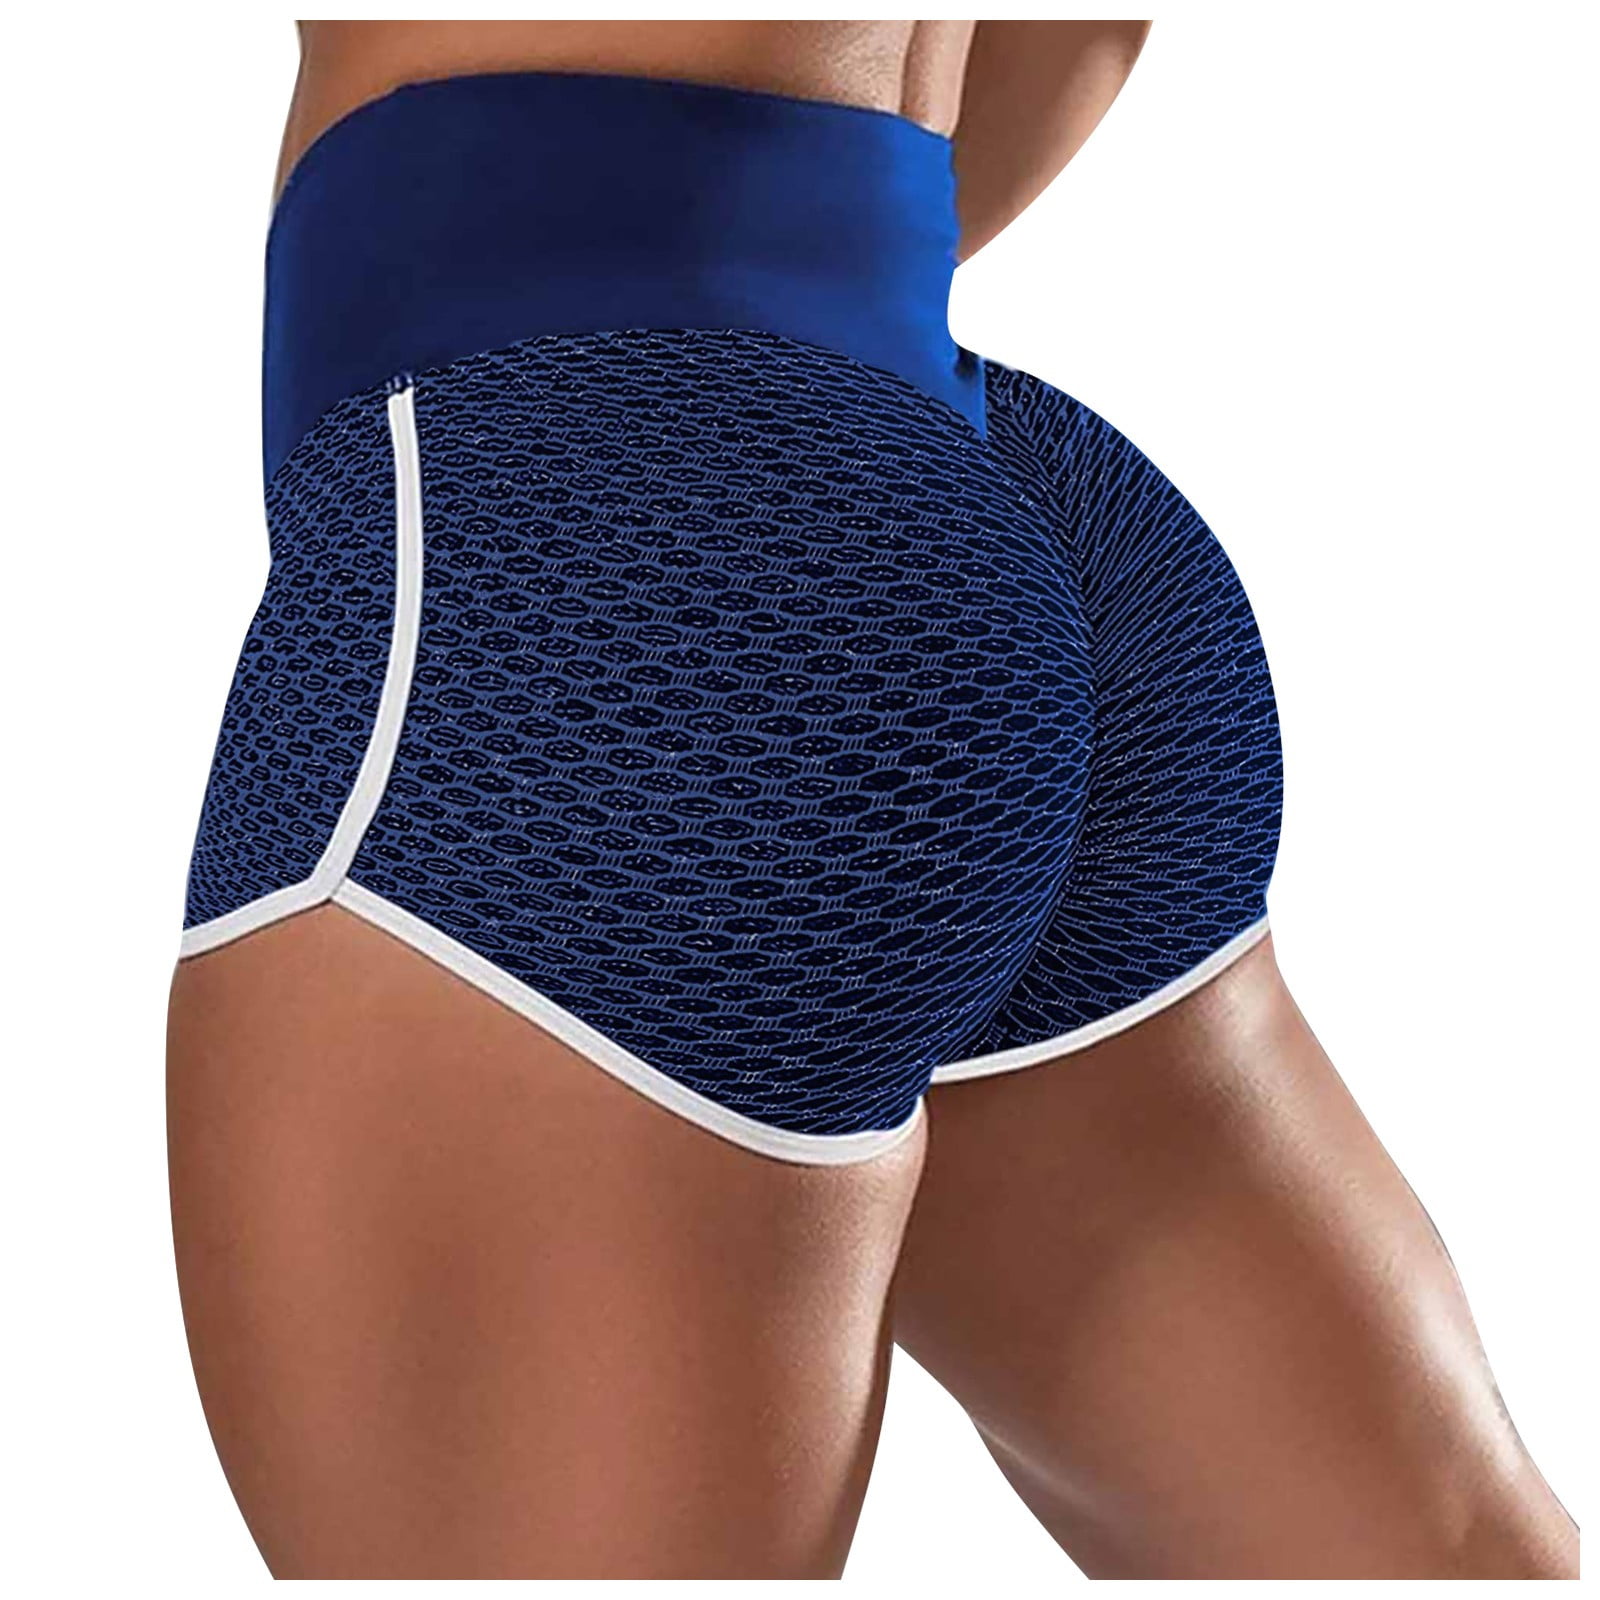 Mens Yoga Shorts with Pouch Cut Out Yoga Shorts Women Yoga Shorts Small  Women's Casual Tight-fitting Skinny Lifting Fitness Sports Yoga Neon  Workout